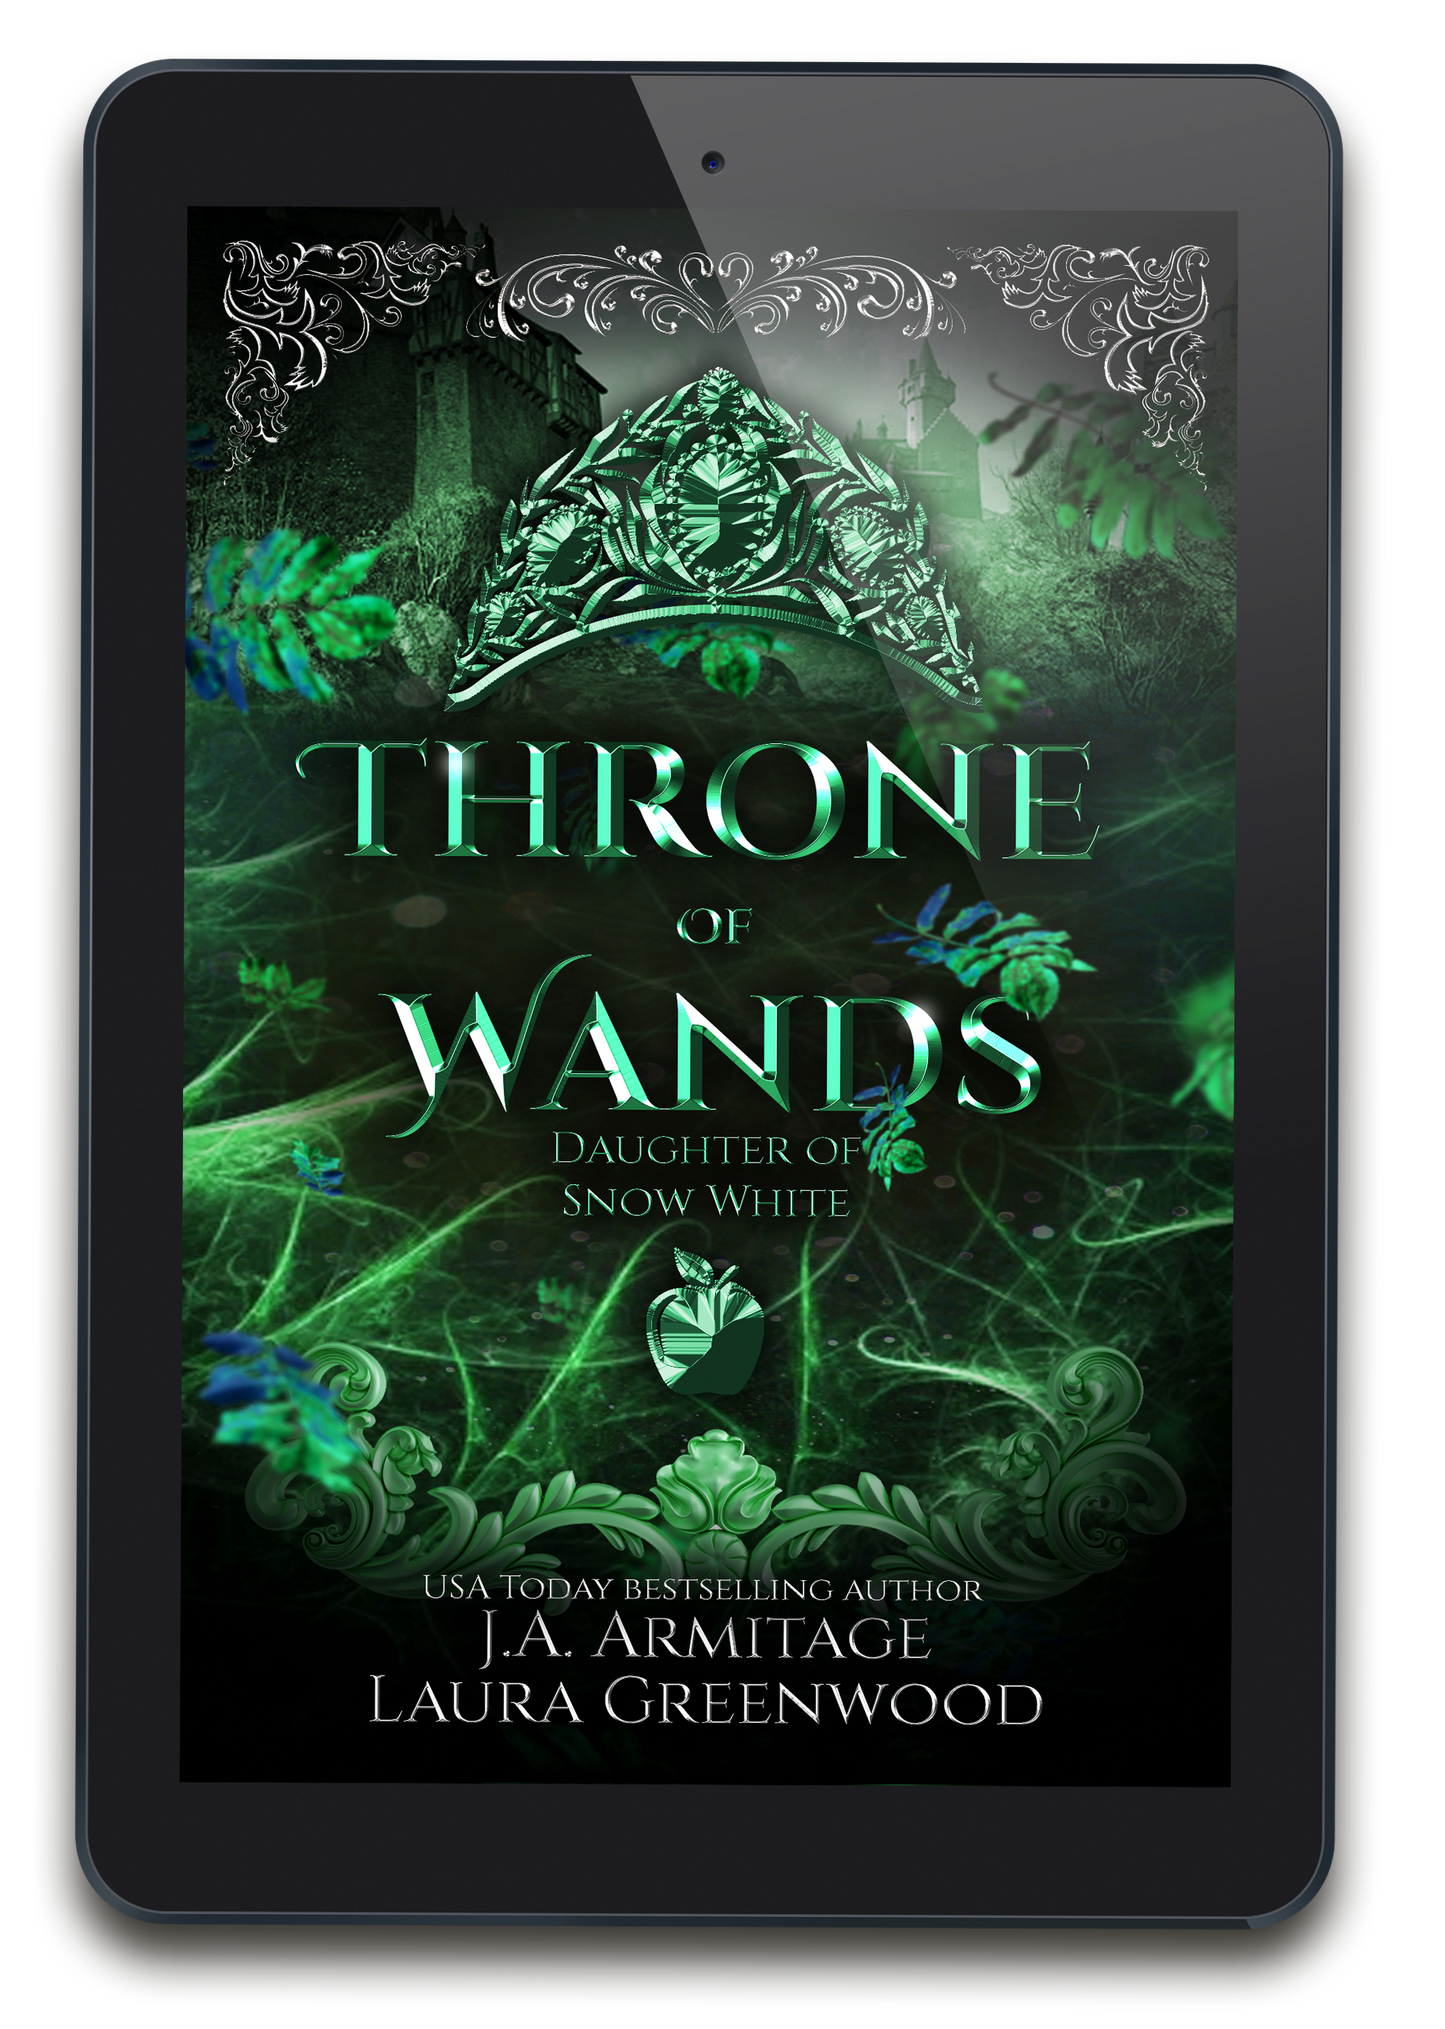 THRONE OF WANDS (Daughter of Snow White) eBOOK